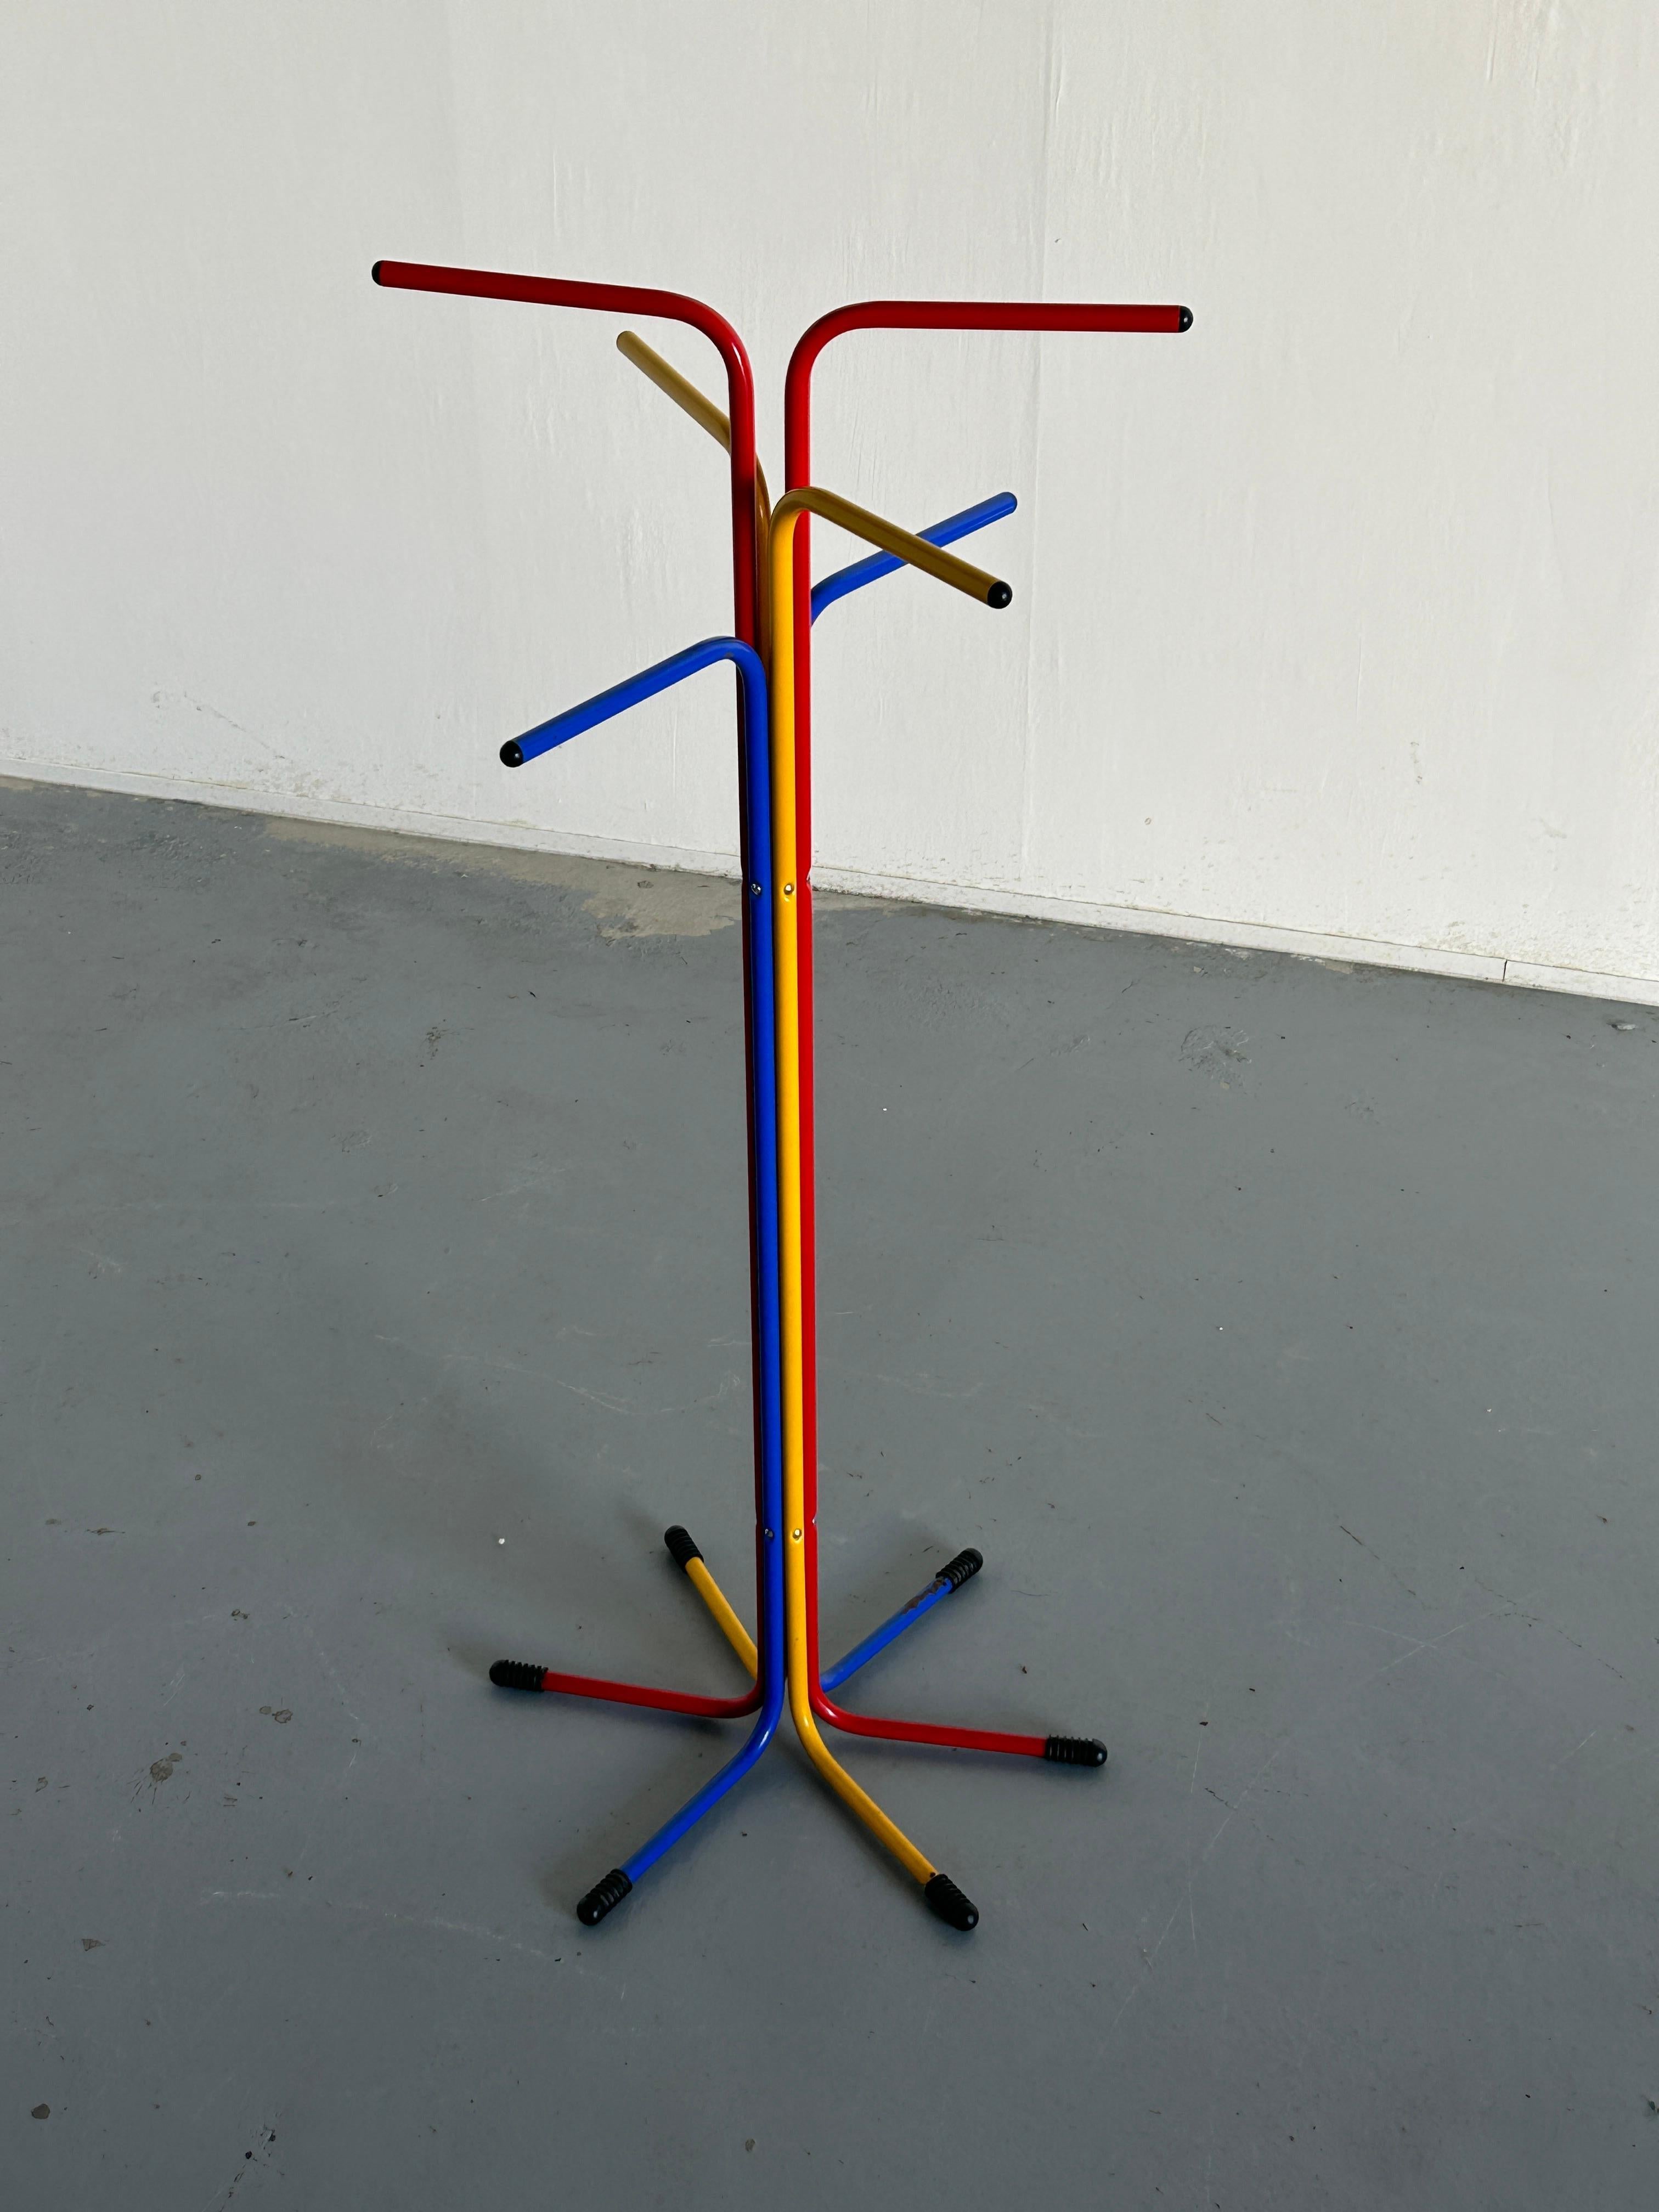 Post-Modern Vintage Colourful Bent Metal RIGG Coat Stand by Tord Bjorklund for Ikea, 1987